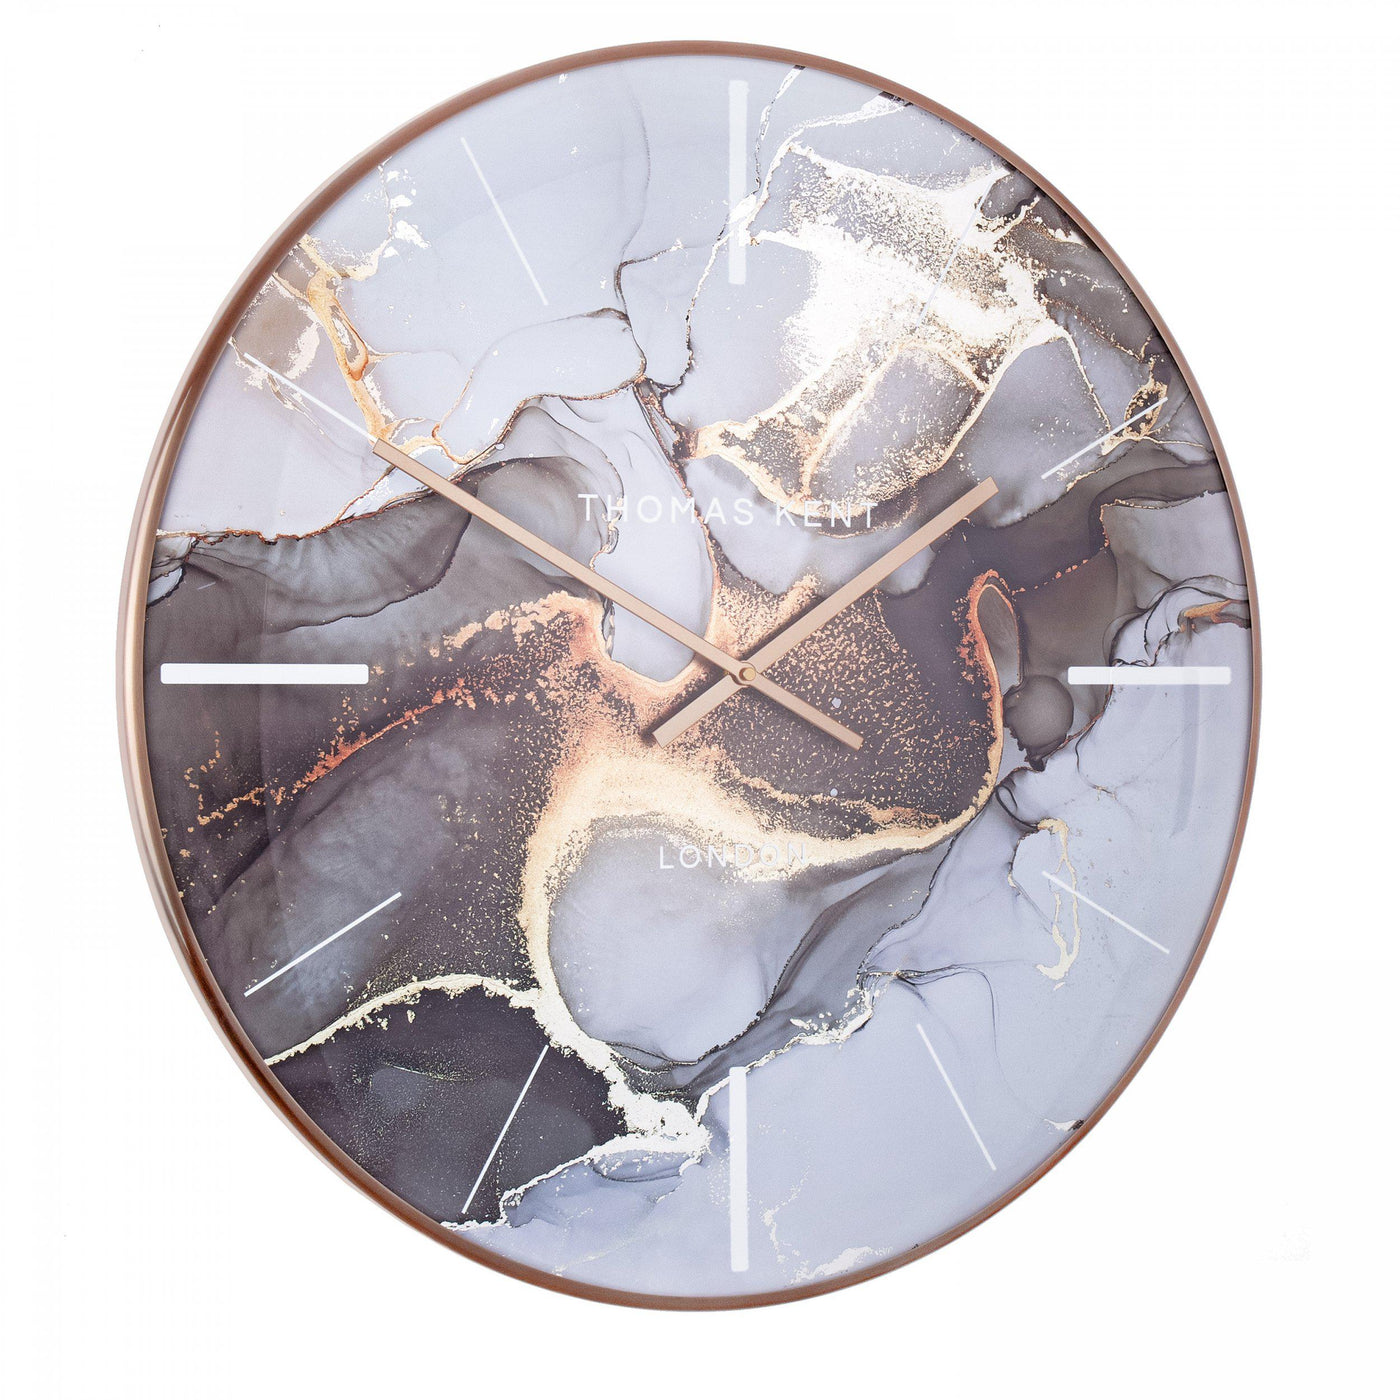 Thomas Kent London. Oyster Grand Wall Clock Copper 26" (66cm) *STOCK DUE LATE MARCH* - timeframedclocks